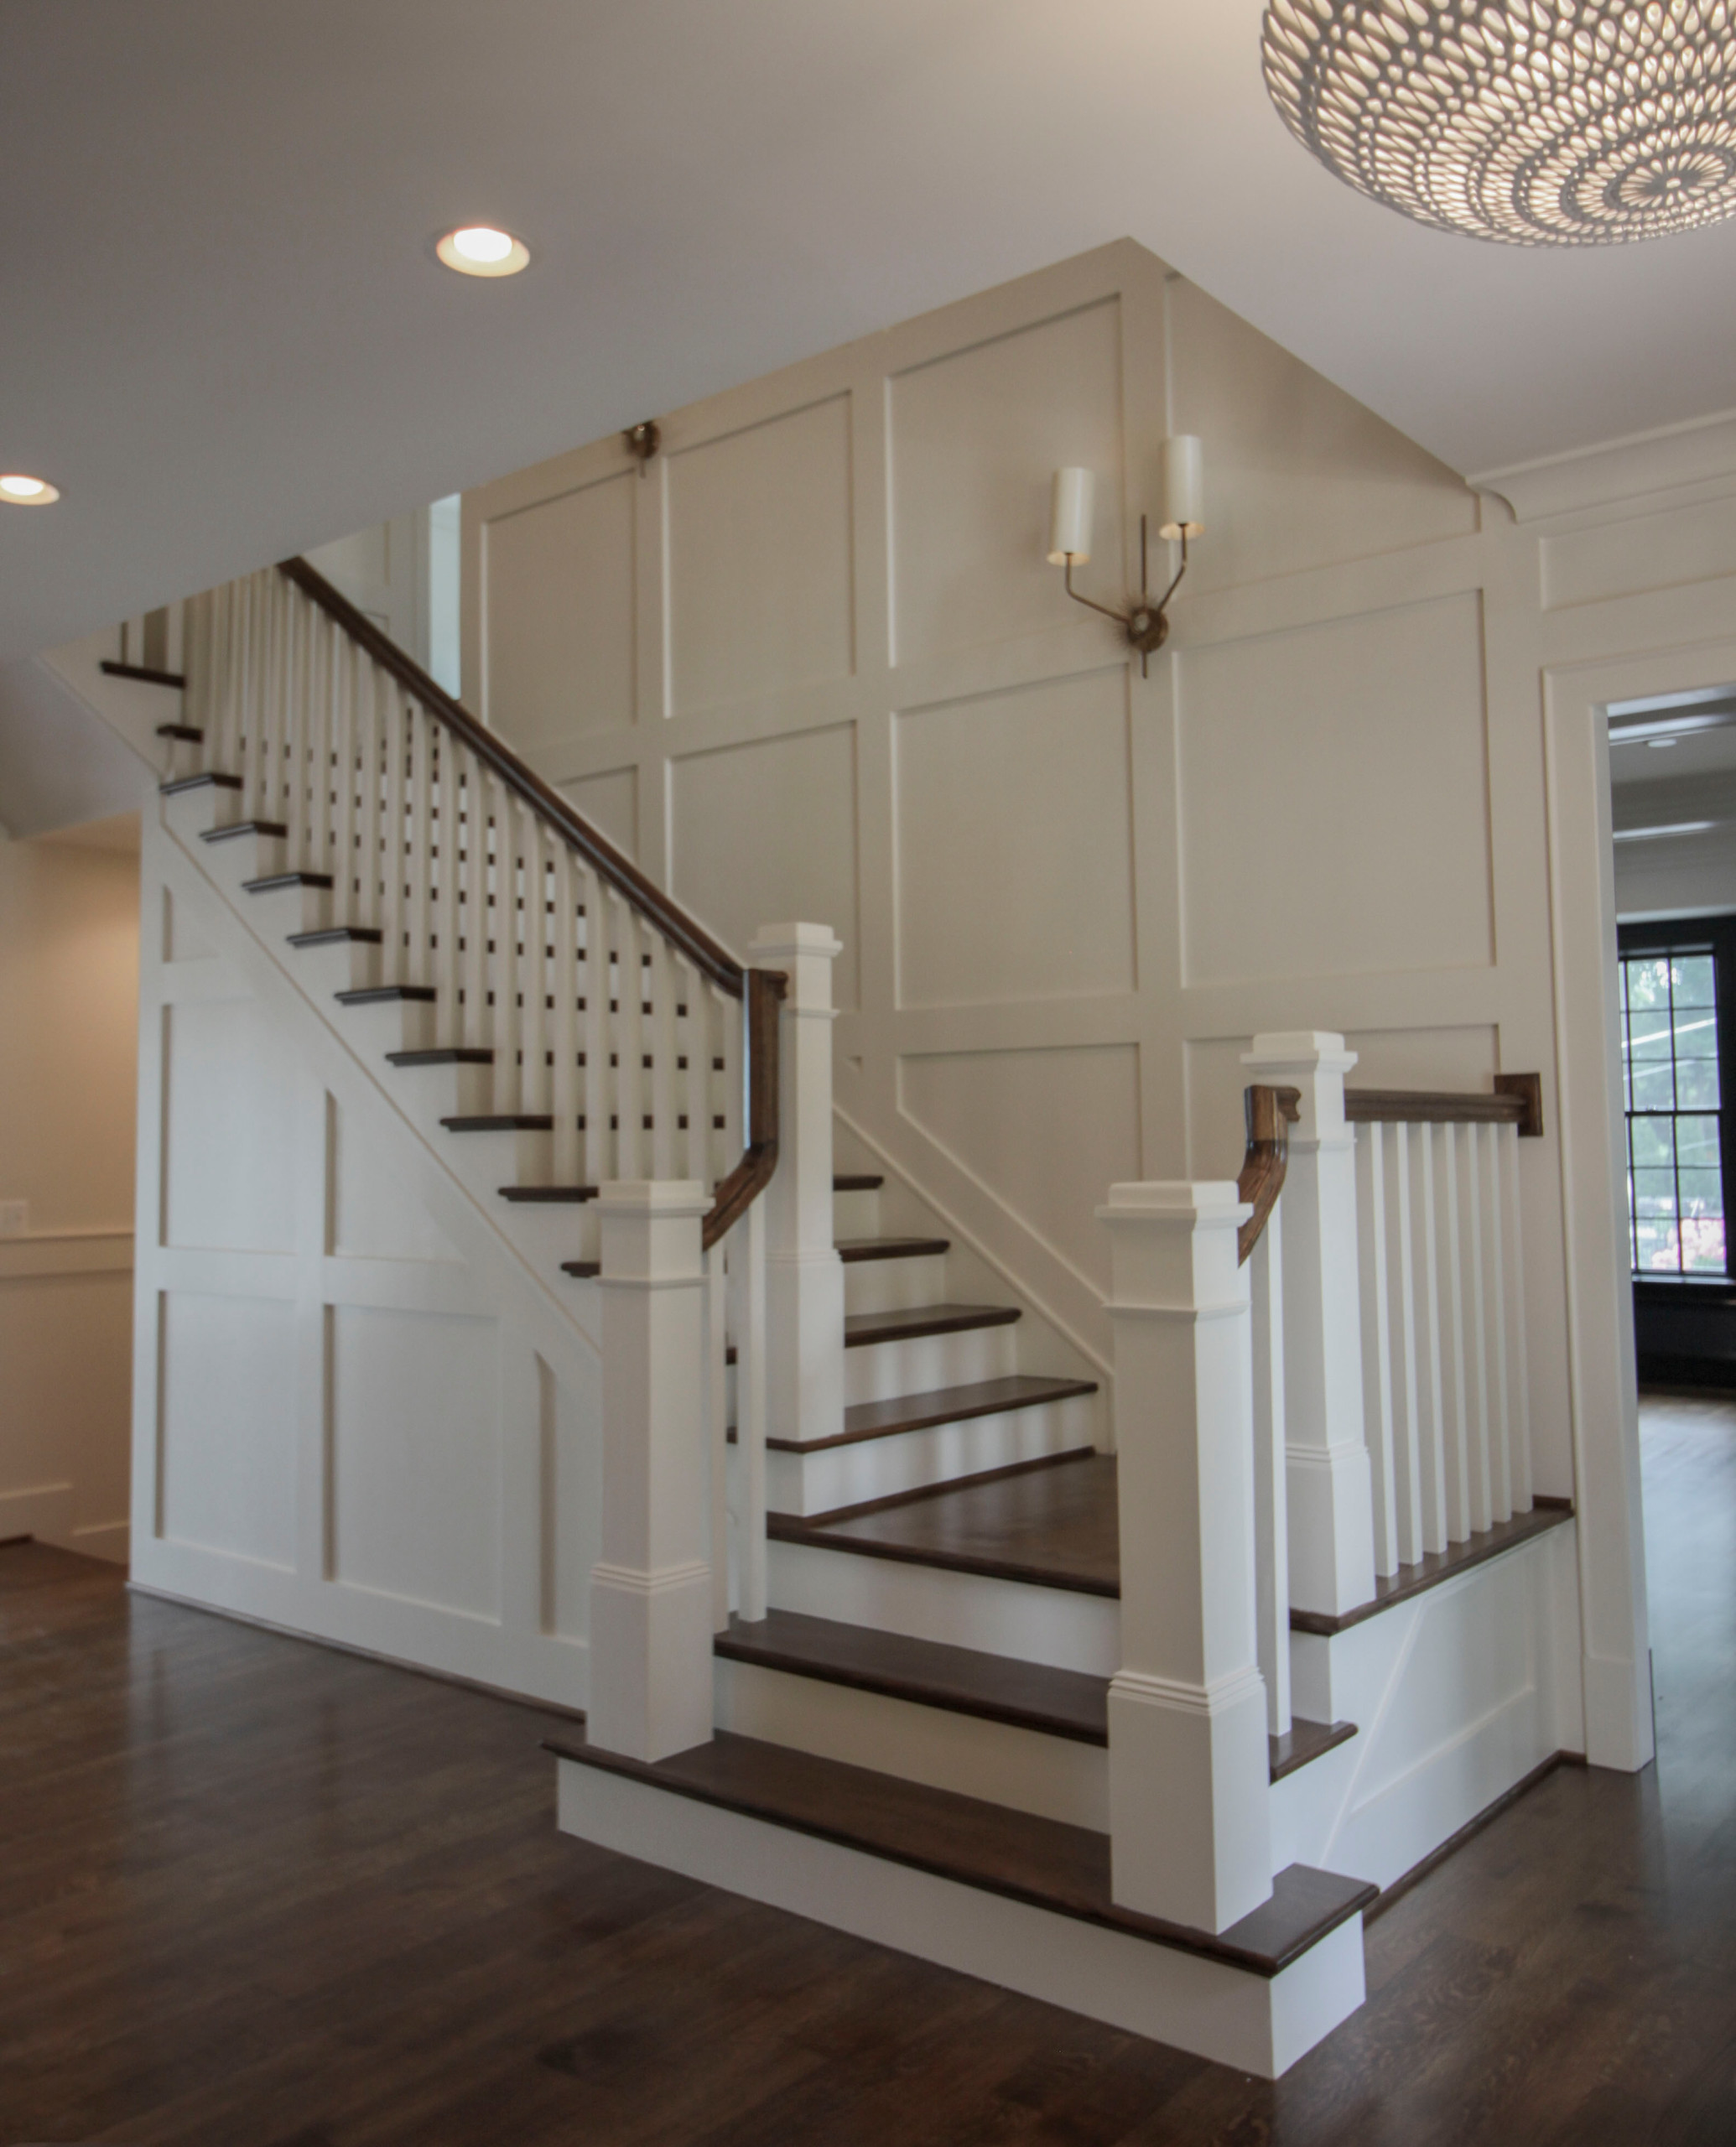 The combination of dark-stained treads and handrails with white-painted vertical balusters and newels, tie the stairs in with the other wonderful architectural elements of this new and elegant home. T